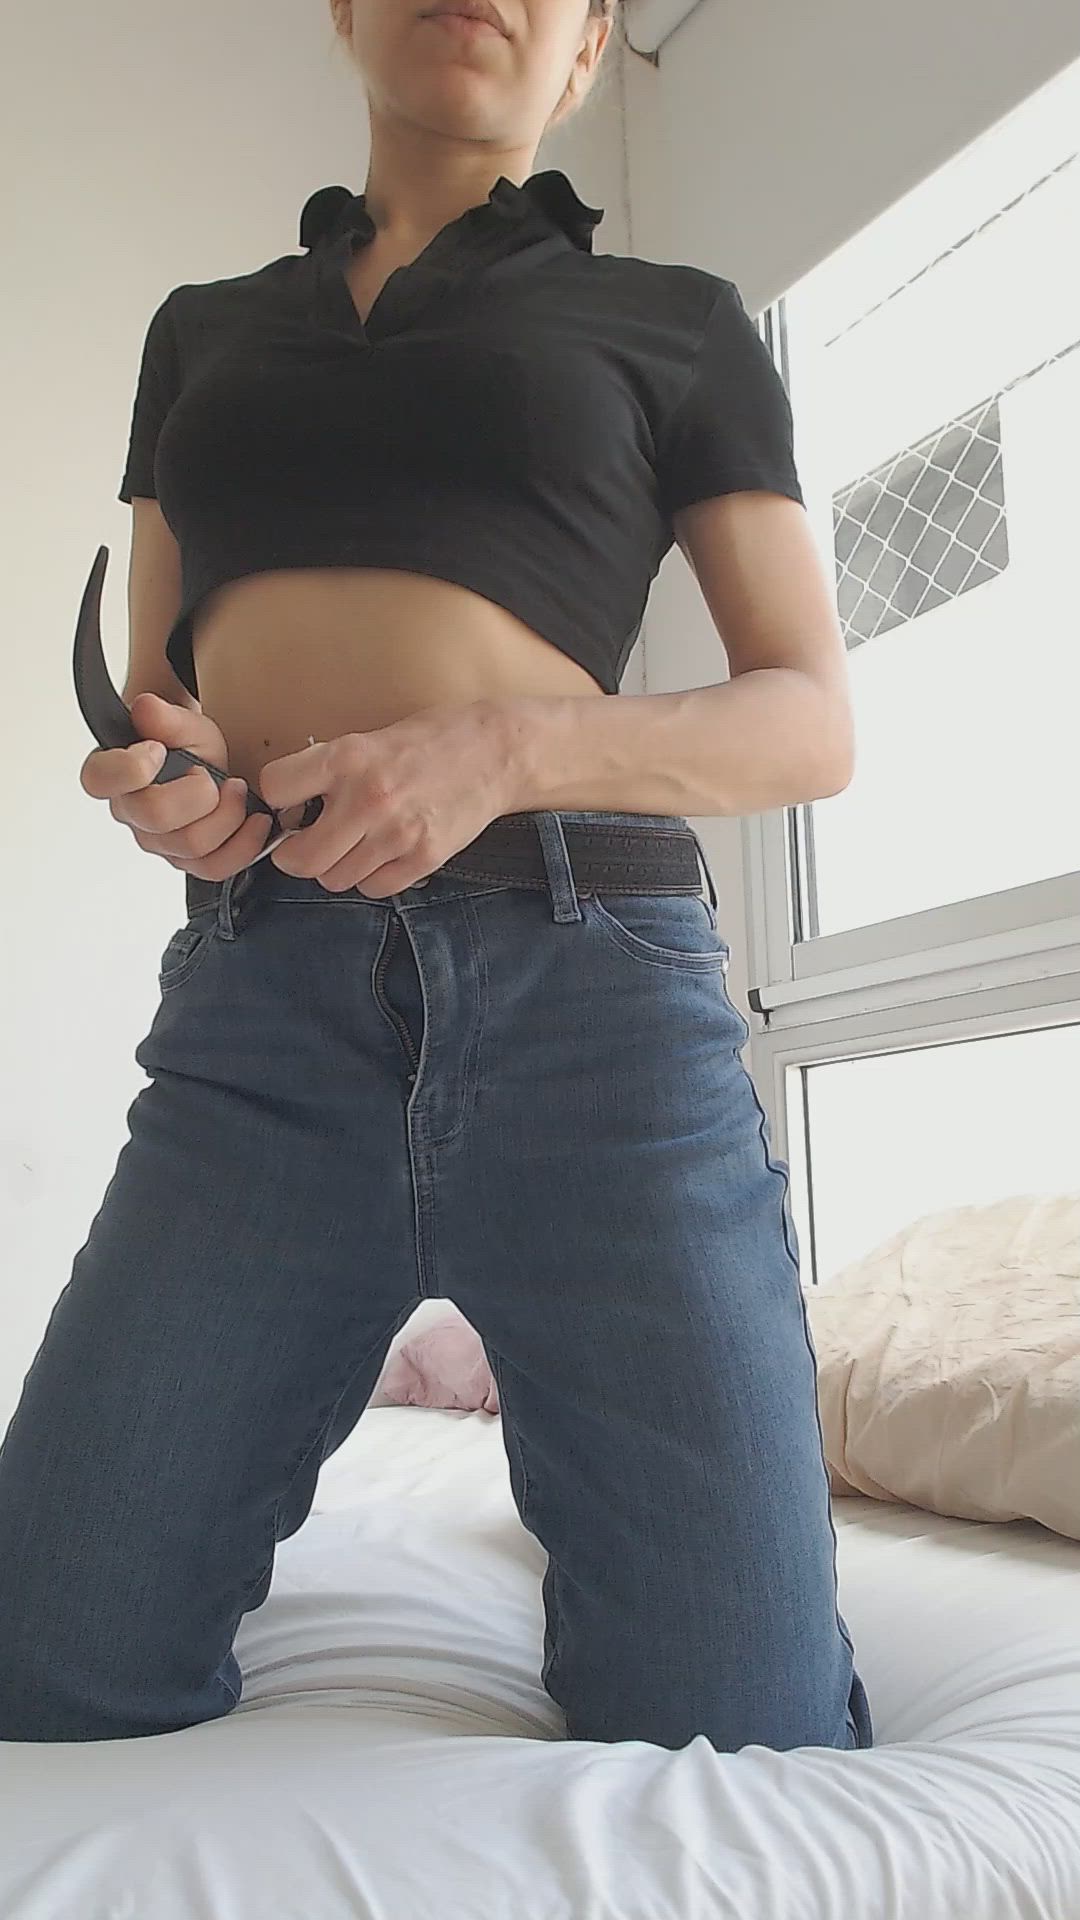 Tits porn video with onlyfans model lulu snito <strong>@lulusnito</strong>